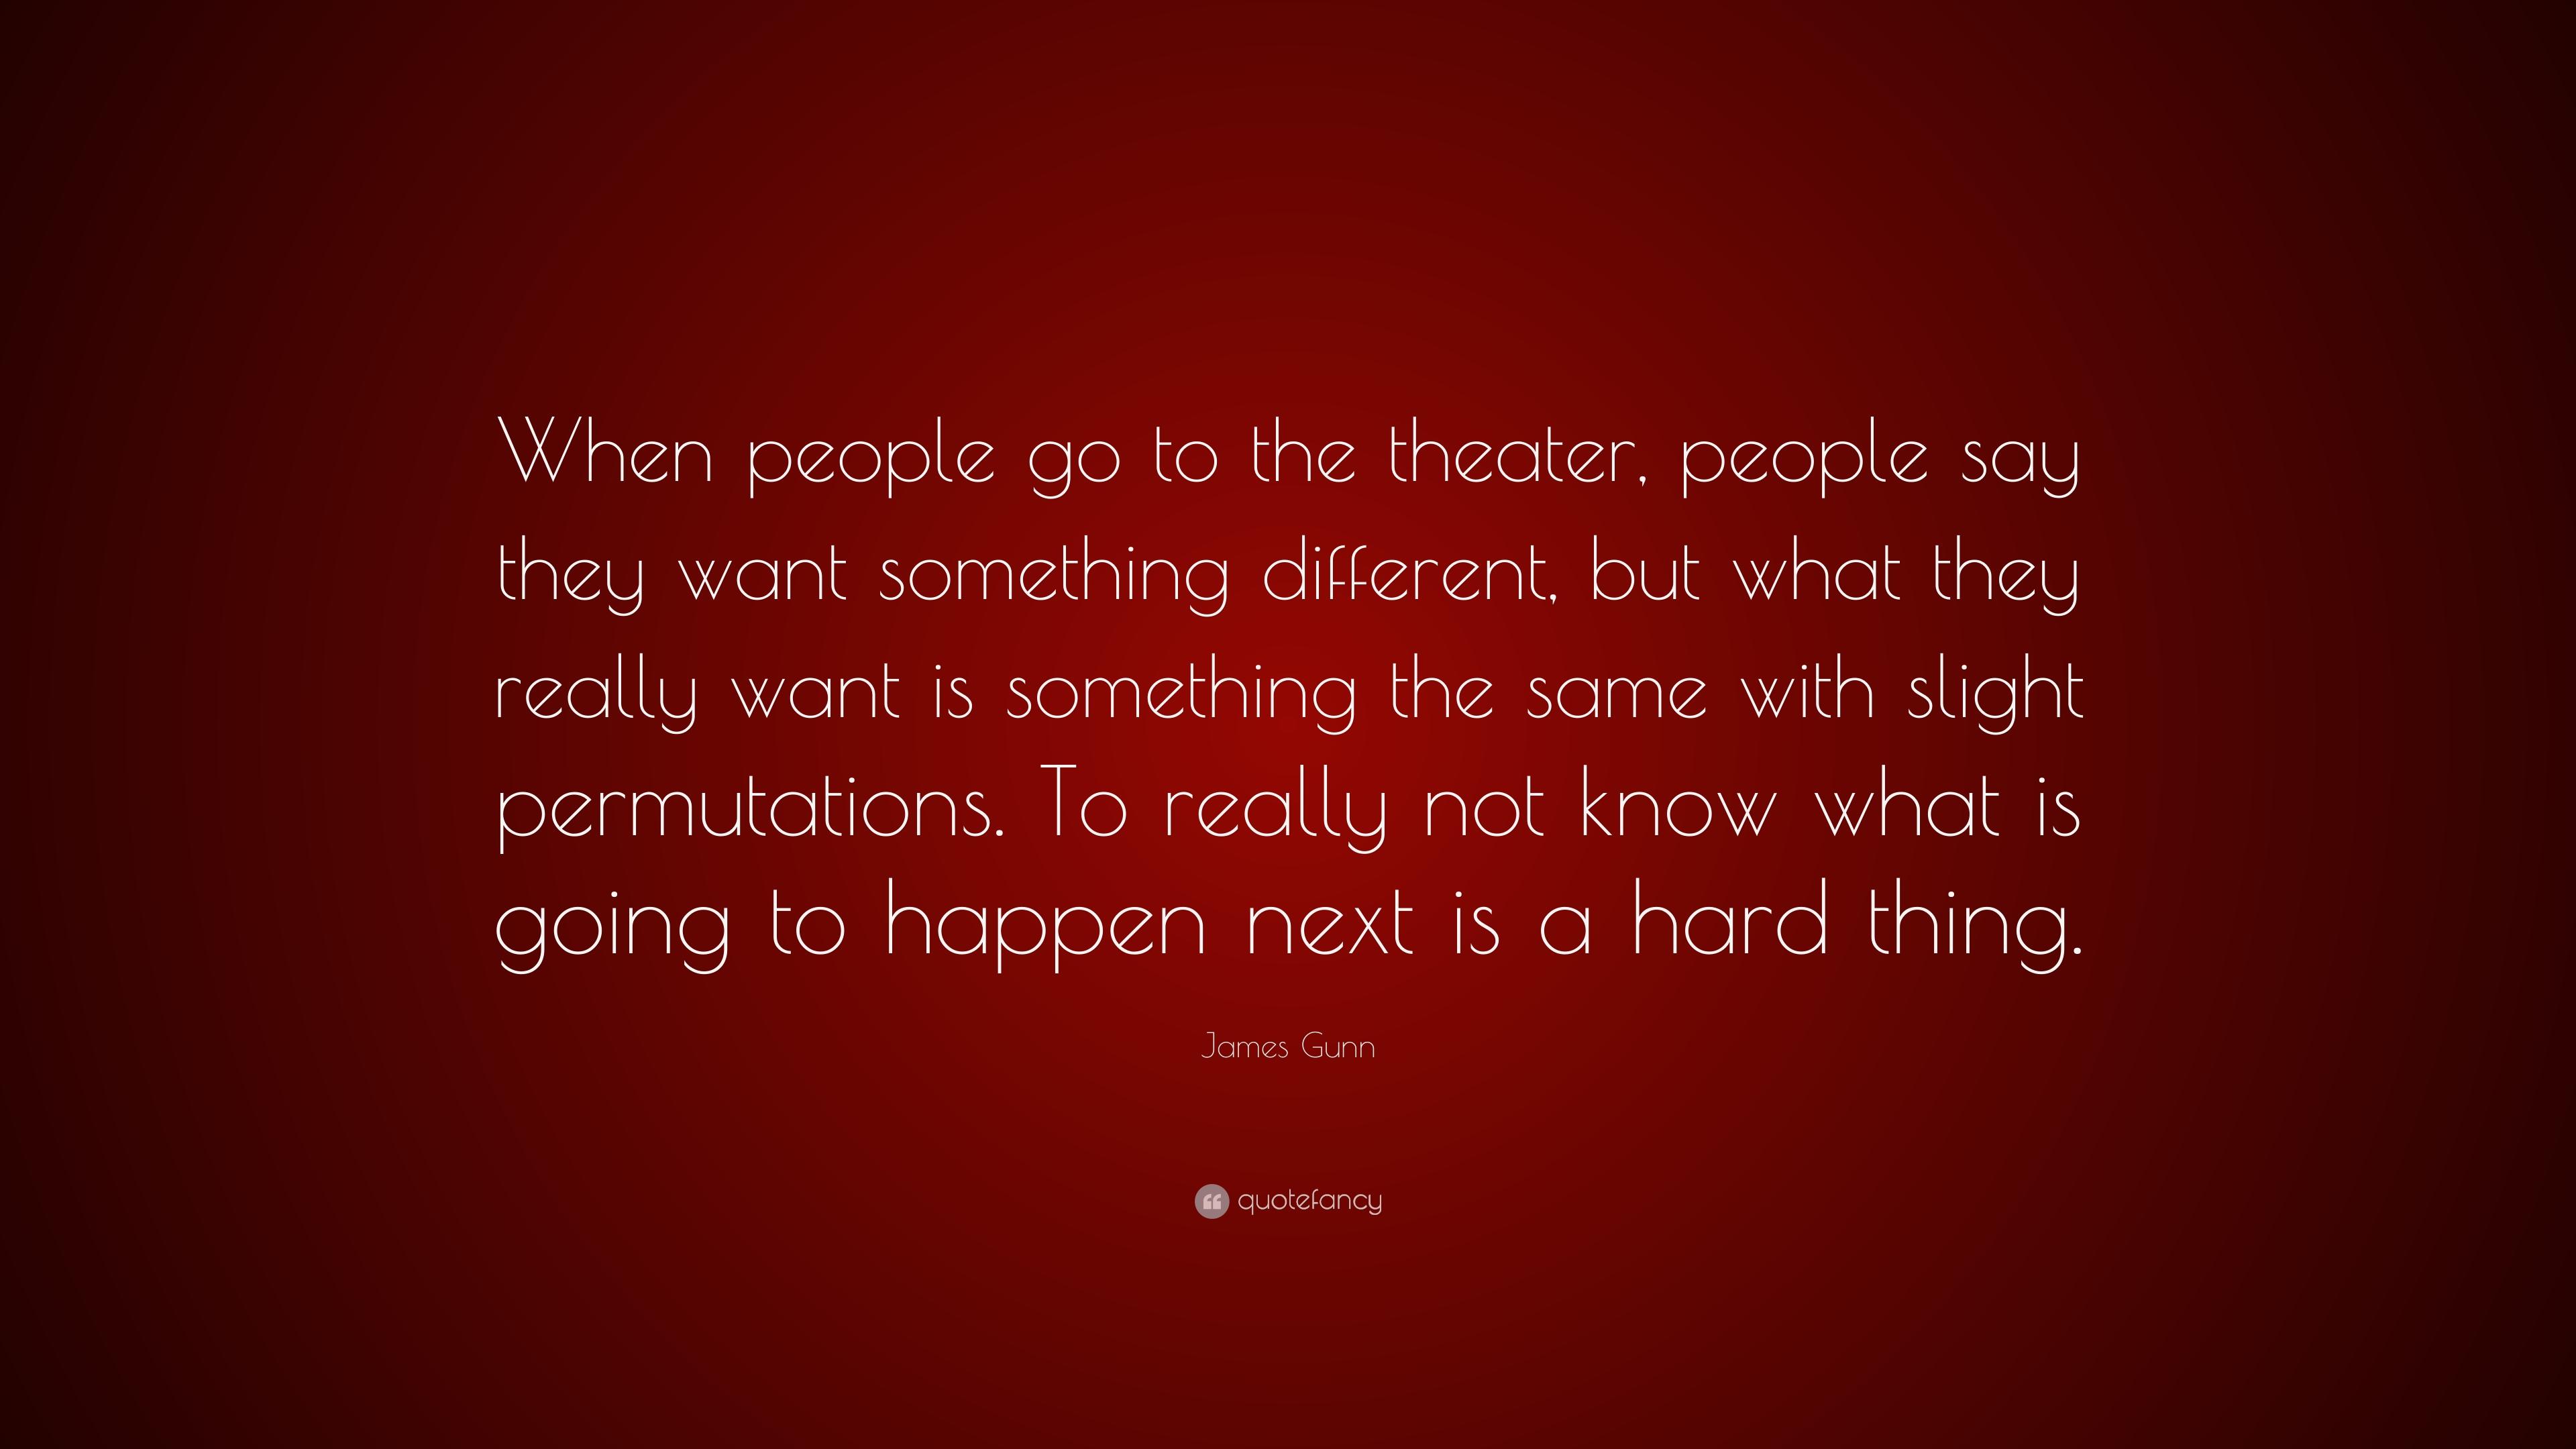 James Gunn Quote: “When people go to the theater, people say they